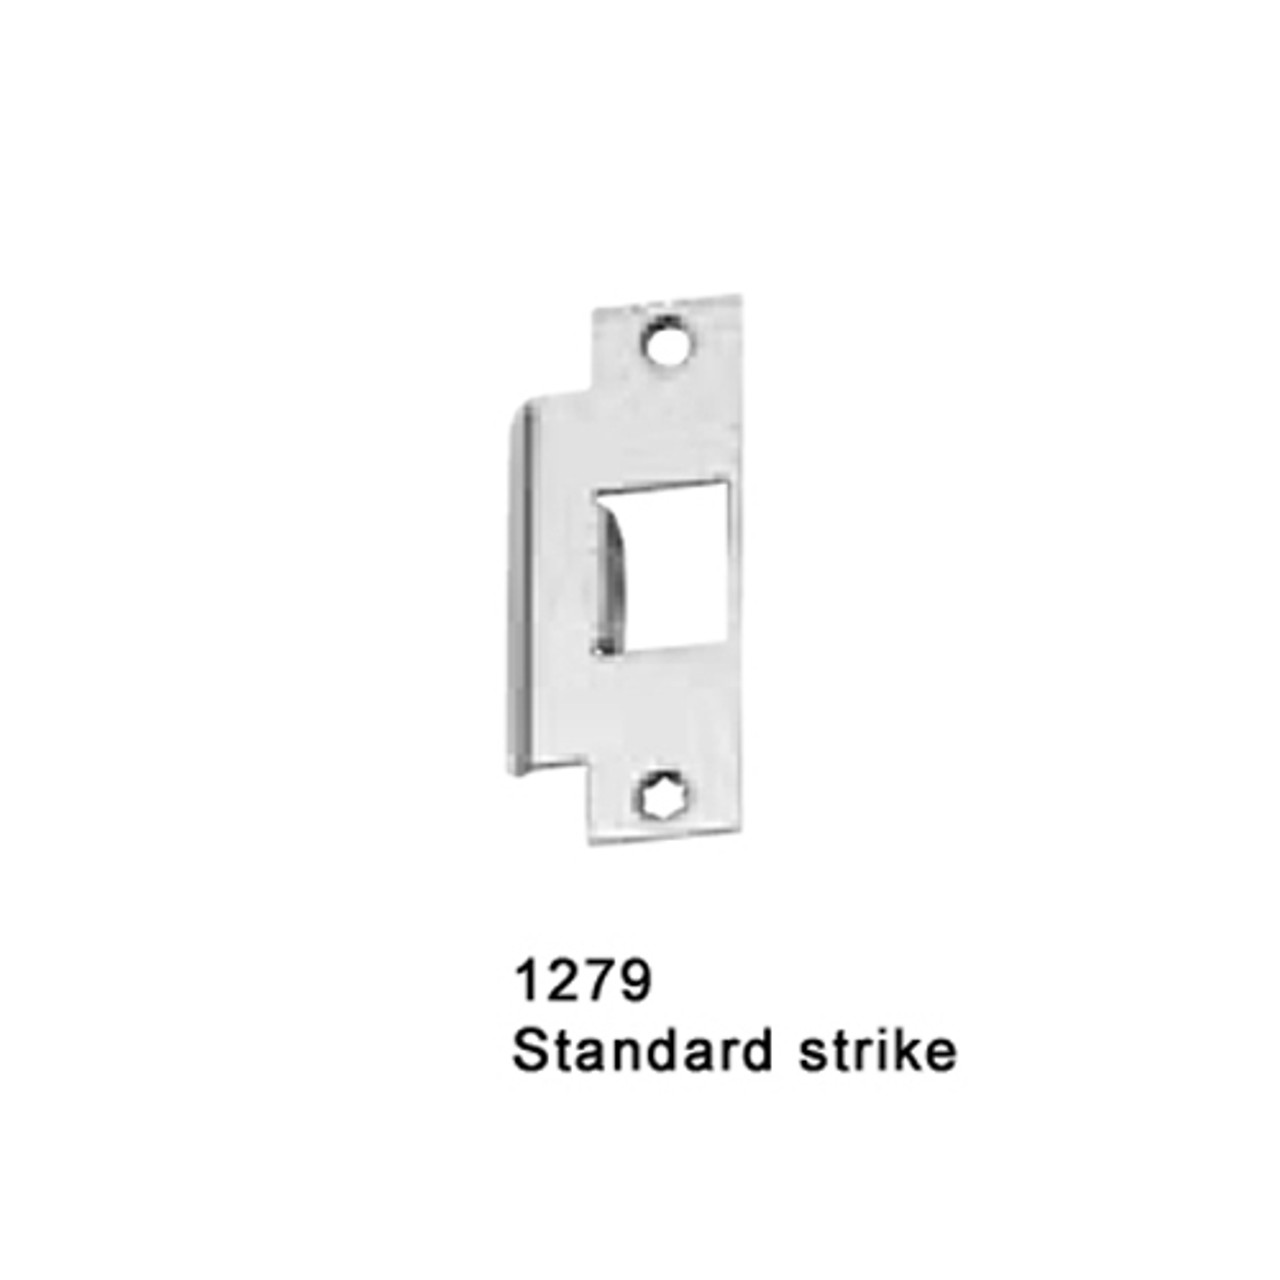 CD25-M-DT-US32-3-LHR Falcon 25 Series Mortise Lock Devices with 512DT Dummy Trim in Polished Stainless Steel